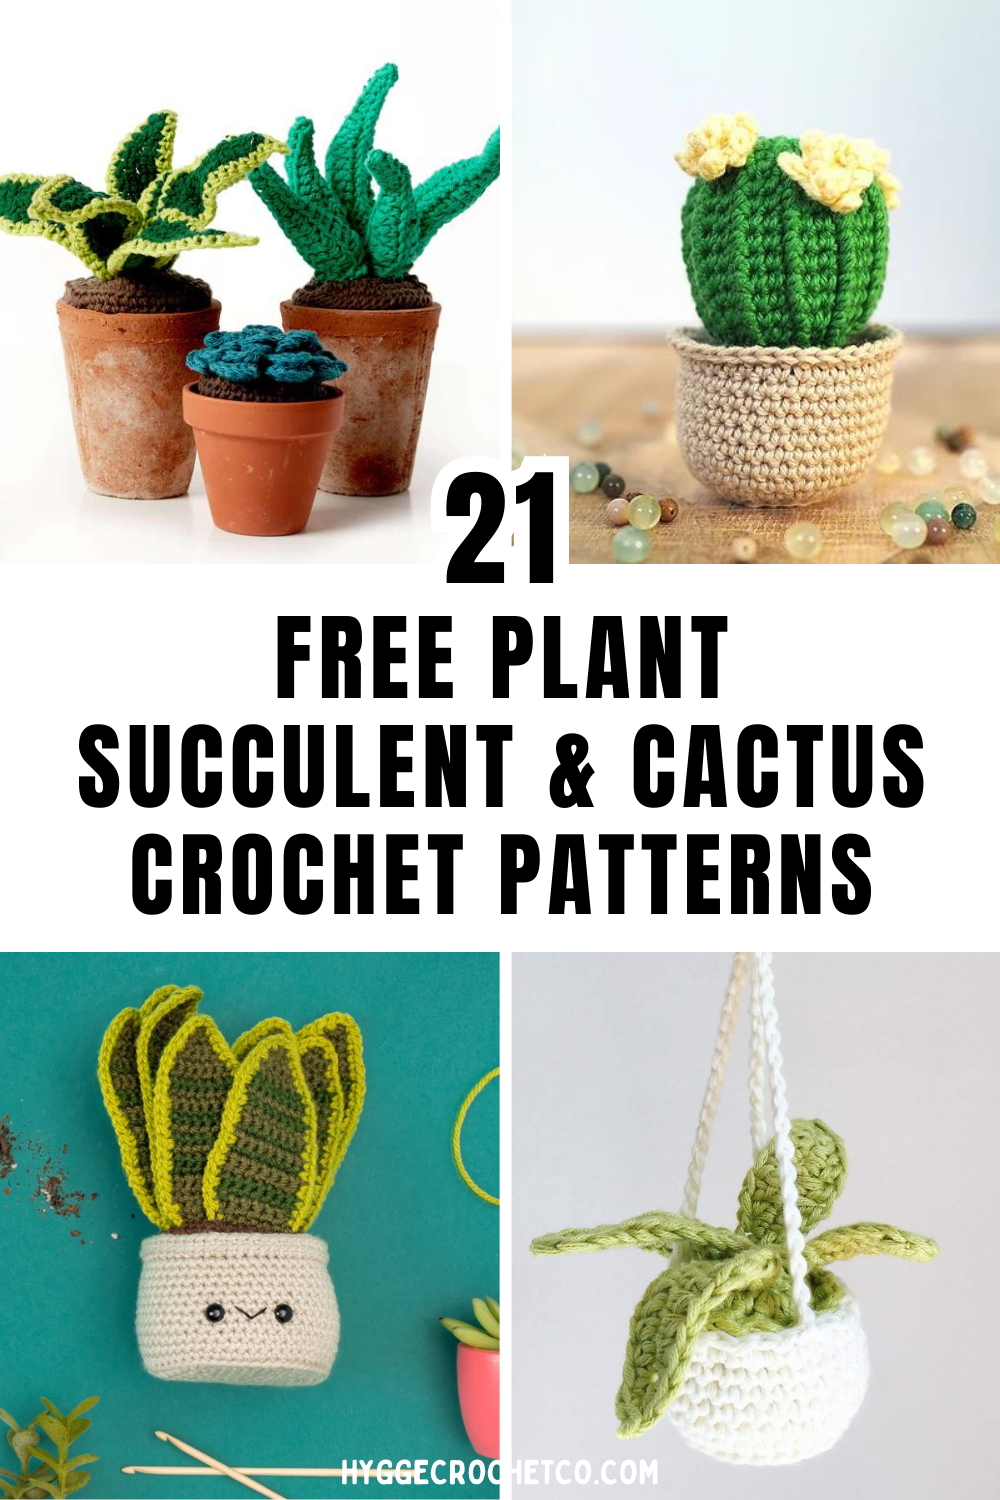 21 Free Crochet Plant, Cactus, and Succulent Patterns